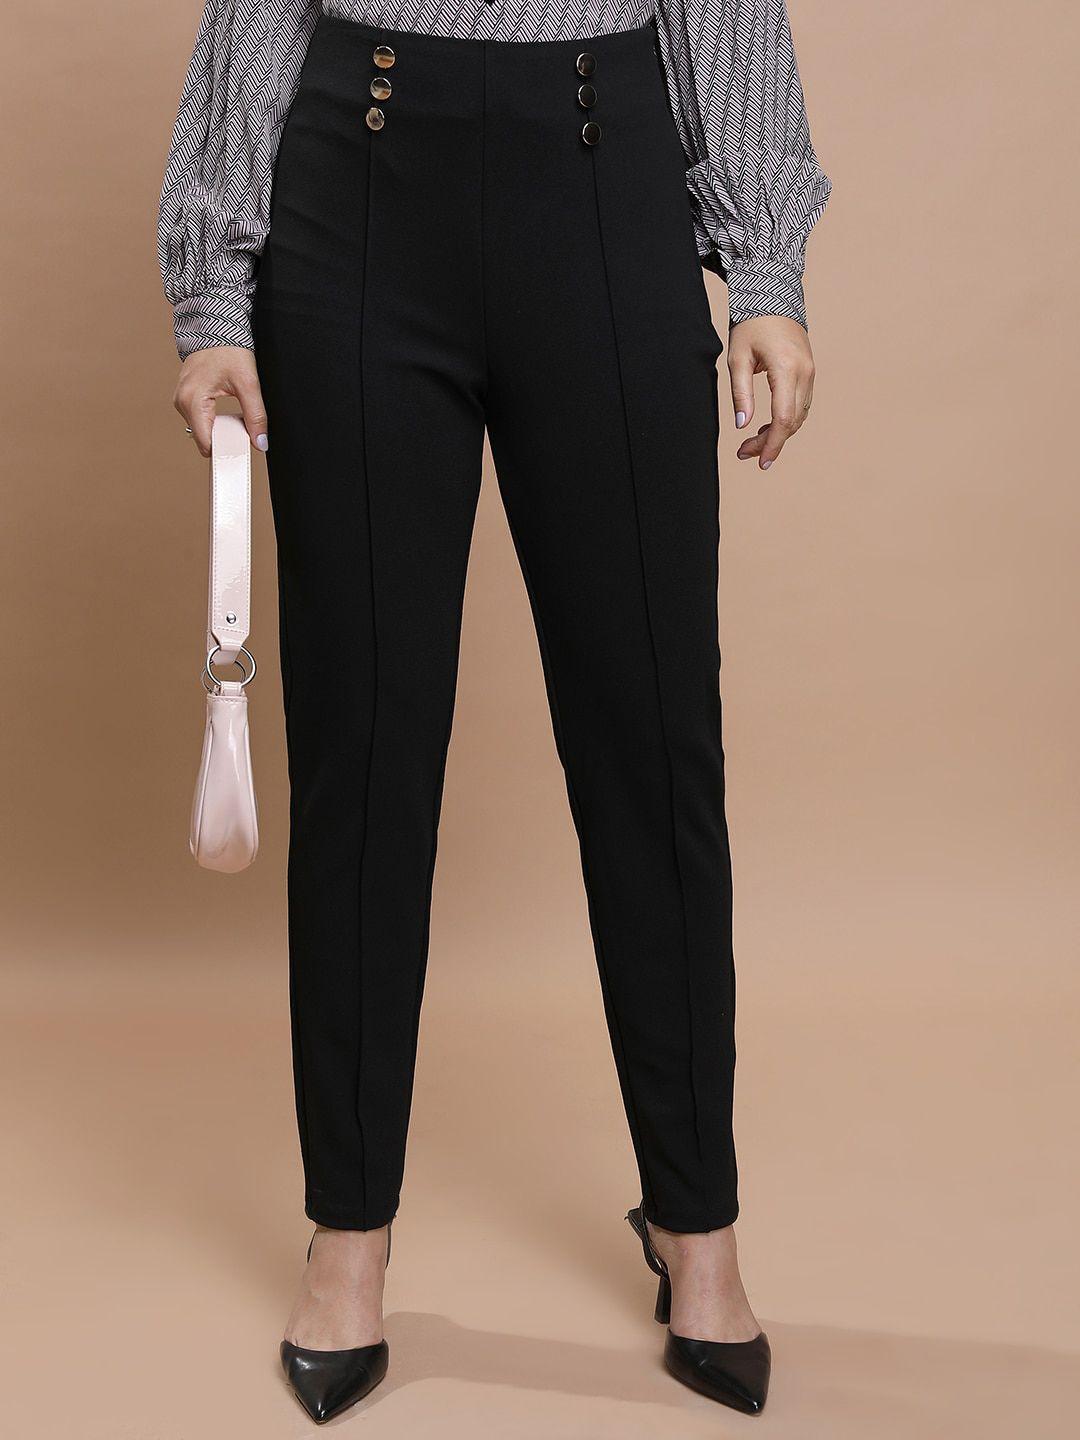 ketch women mid rise slim fit trousers